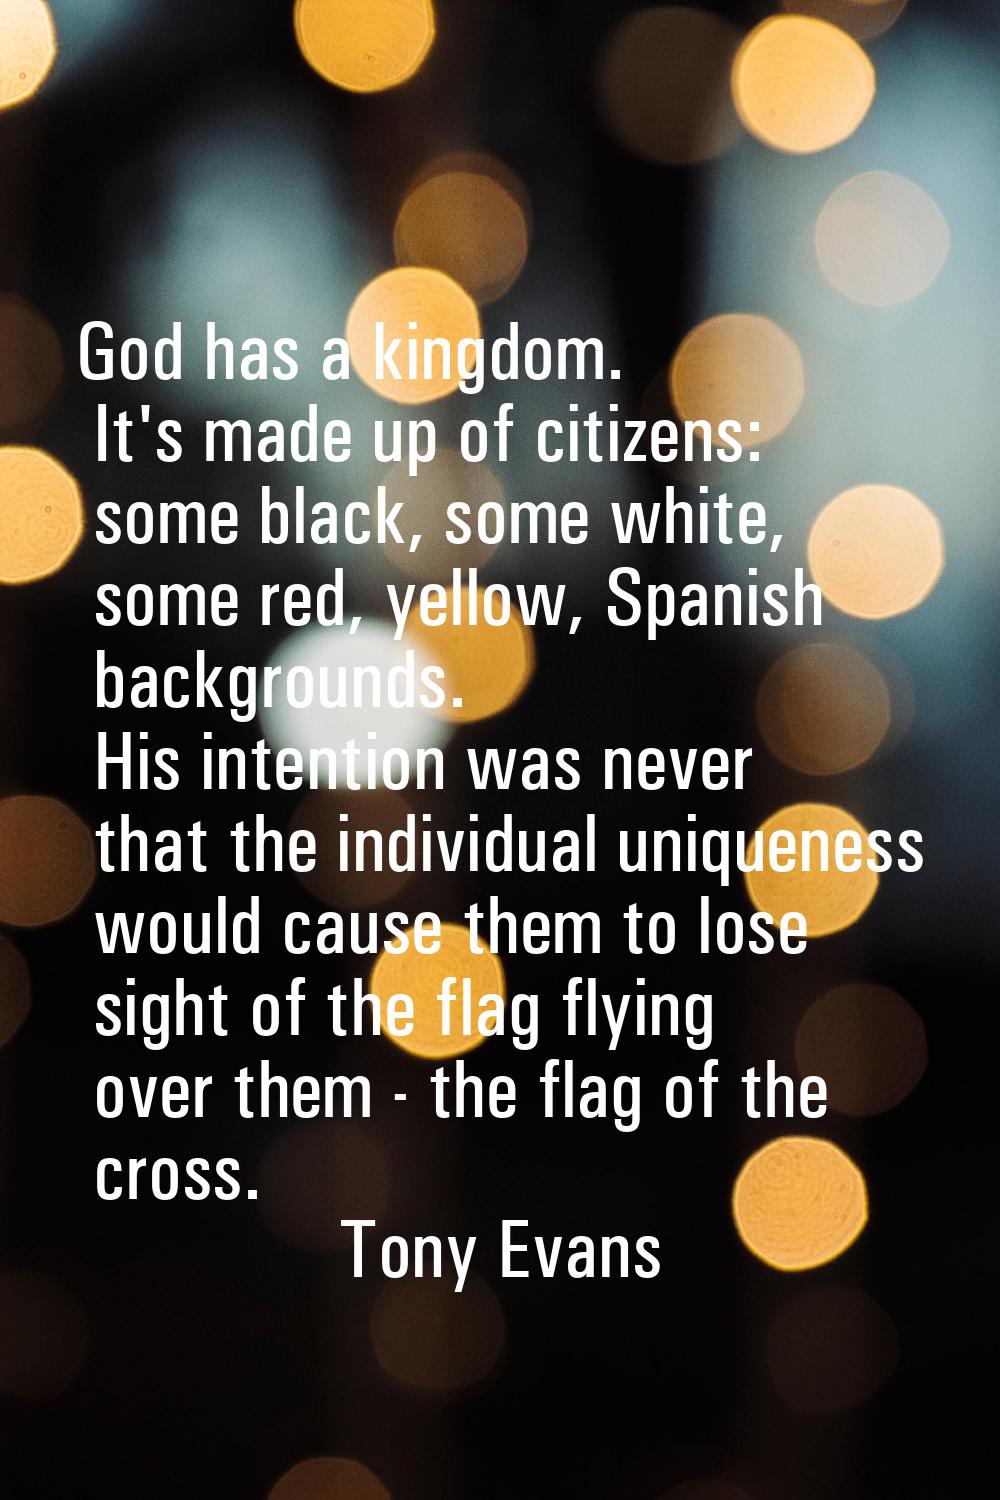 God has a kingdom. It's made up of citizens: some black, some white, some red, yellow, Spanish back